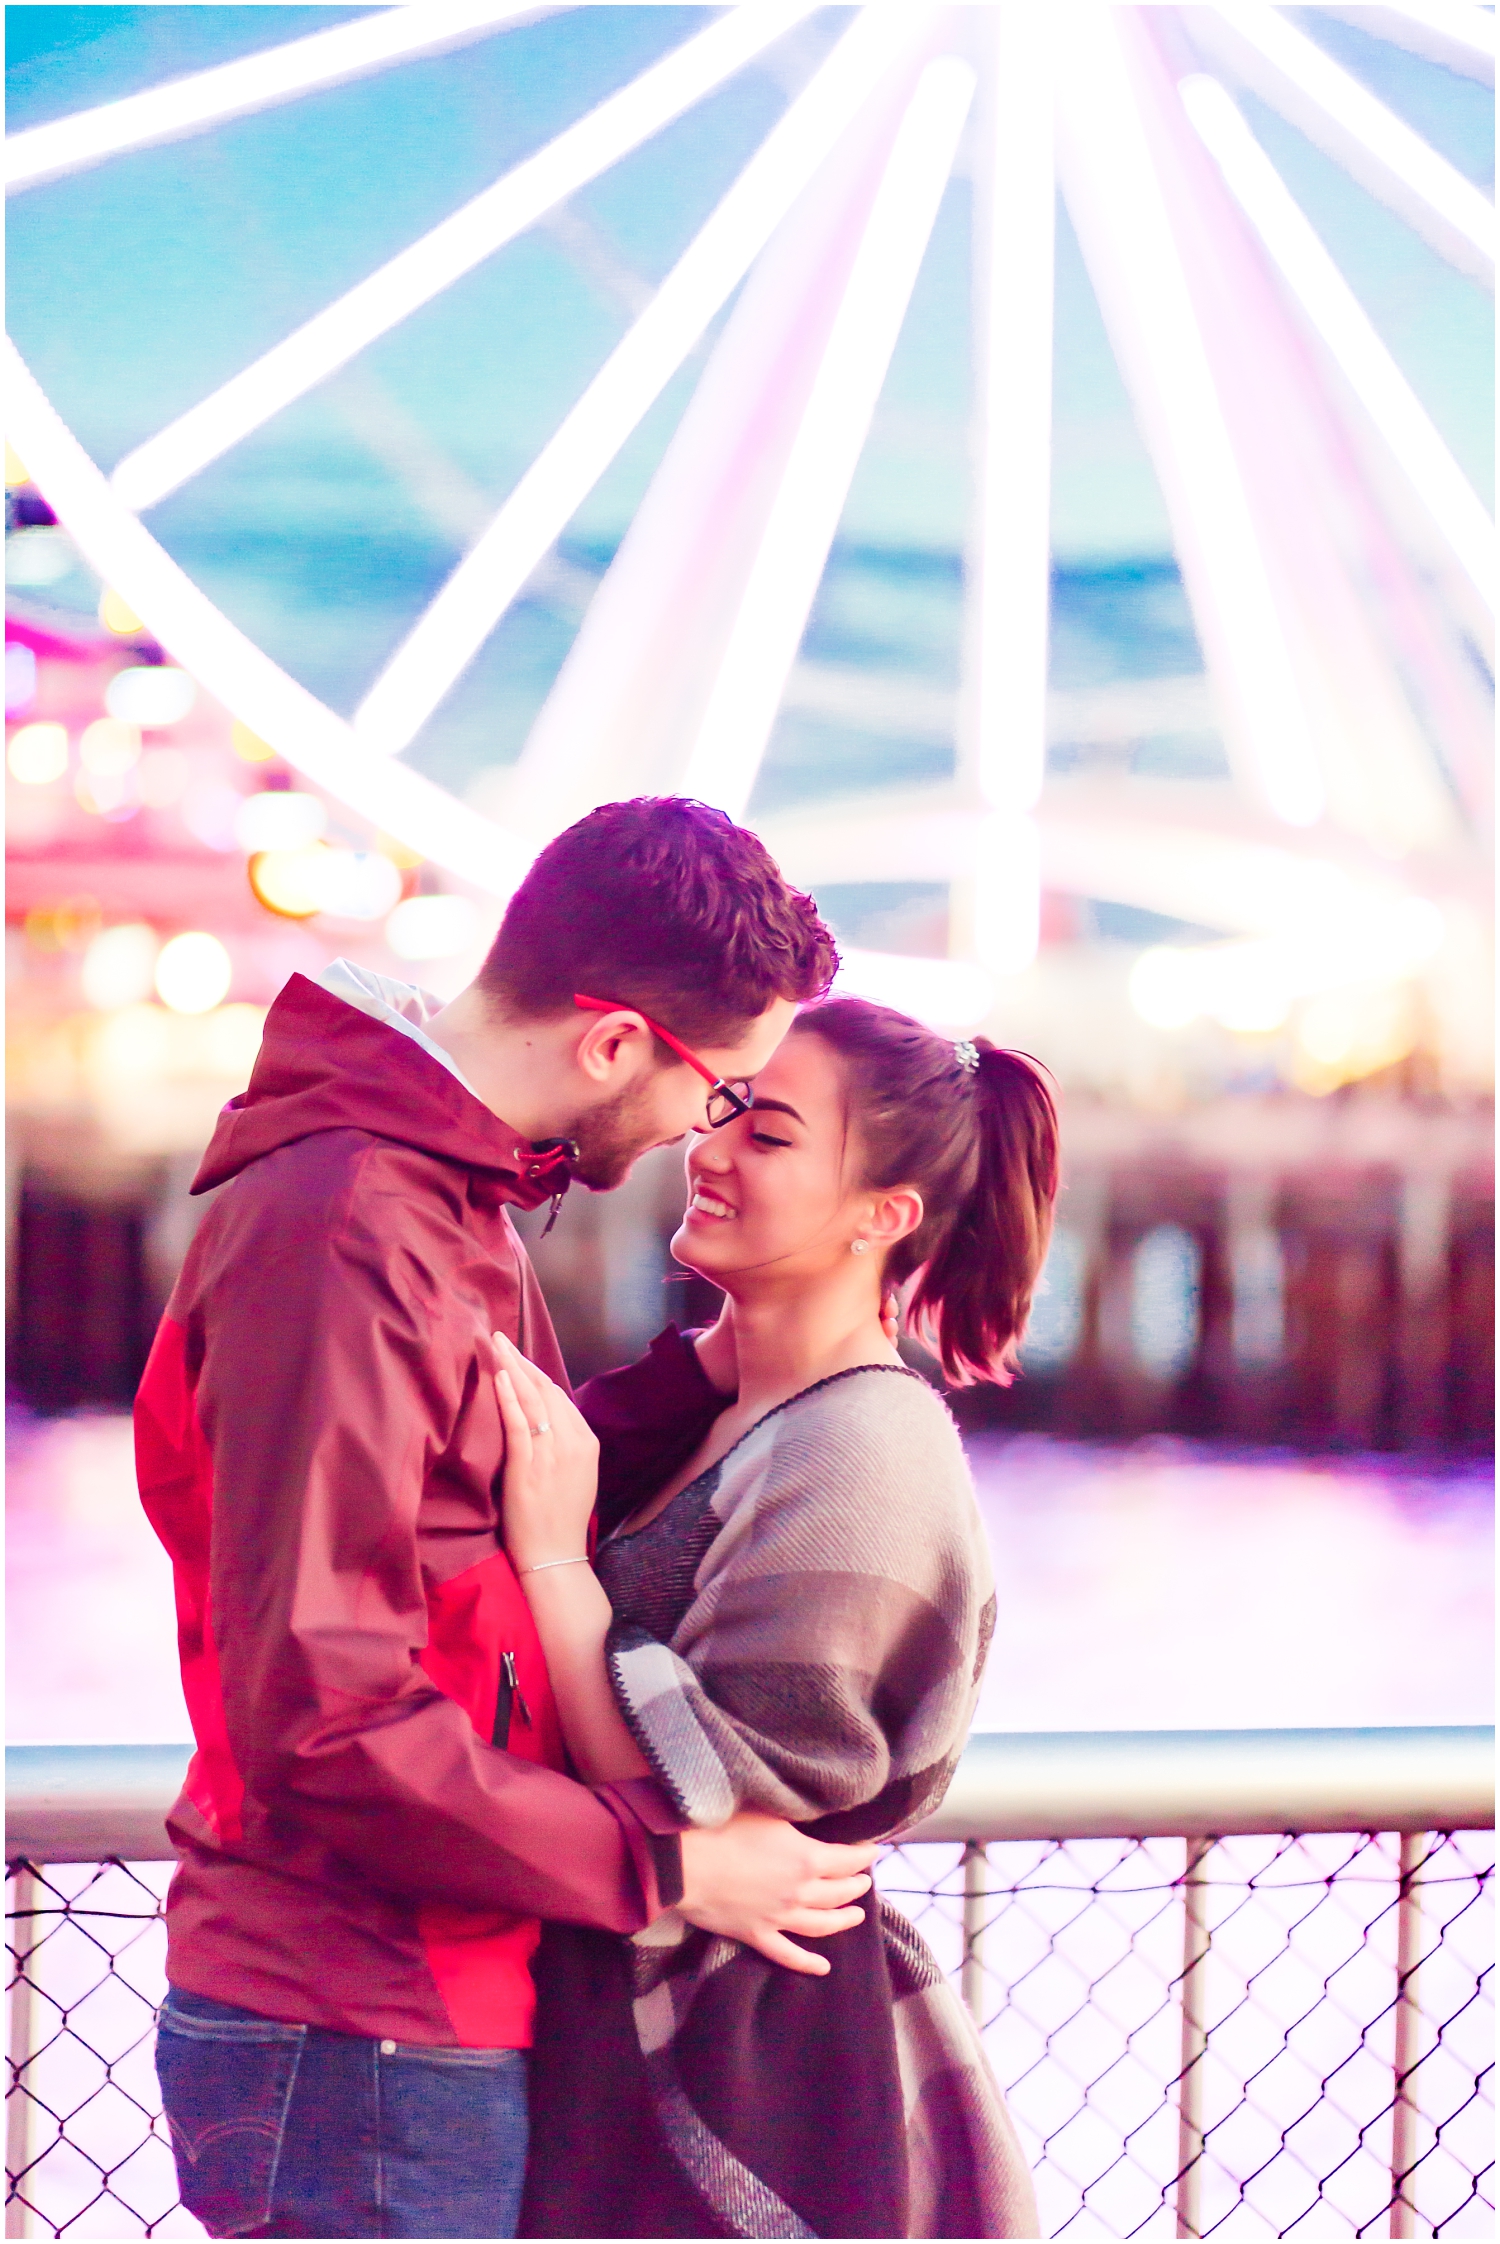 Sunset Downtown Seattle Waterfront Anniversary Session | Stephan & Ale